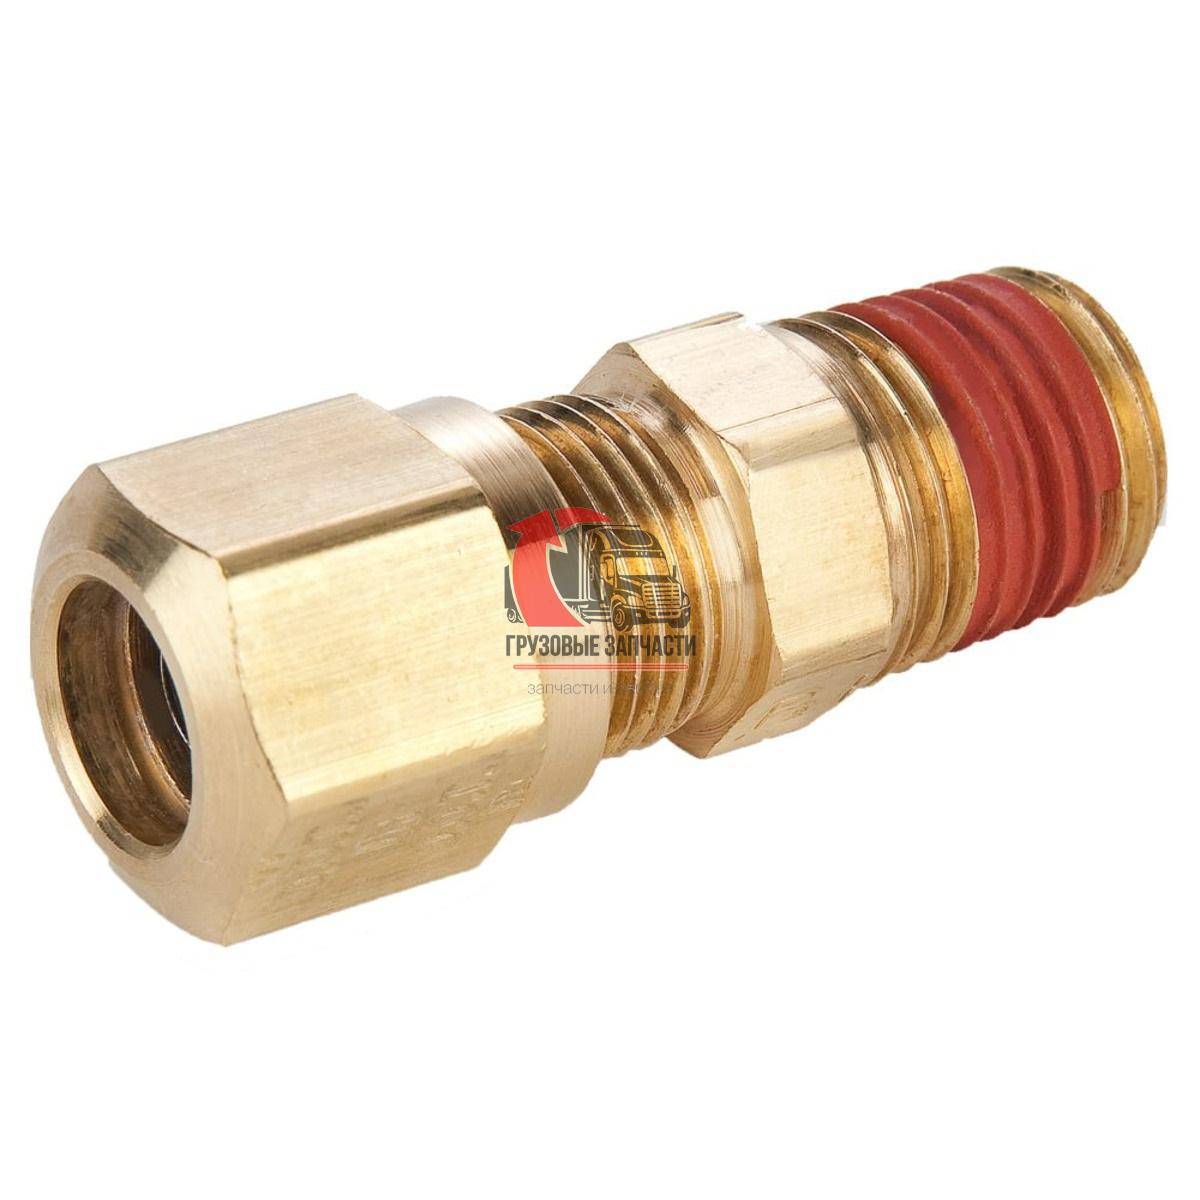 Фитинги грузовые. Parker Hannifin Connector male 1/2. Vs68nta6 6. Parker Hannifin tube to Pipe, Adapter. Parker Hannifin vs271nta6 4.